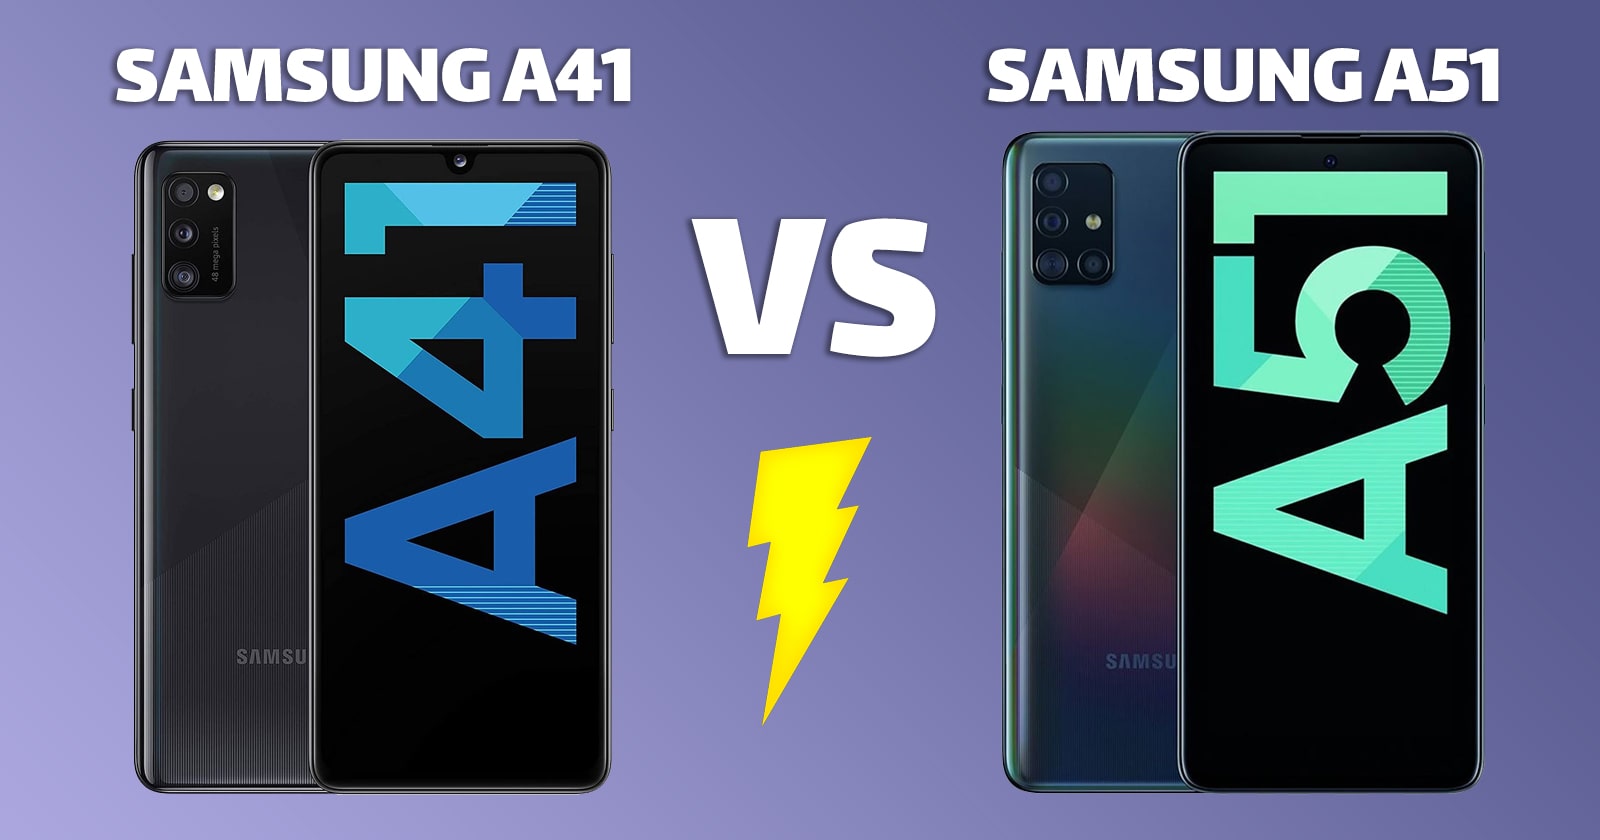 What Is the Difference Between Samsung A41 and A51